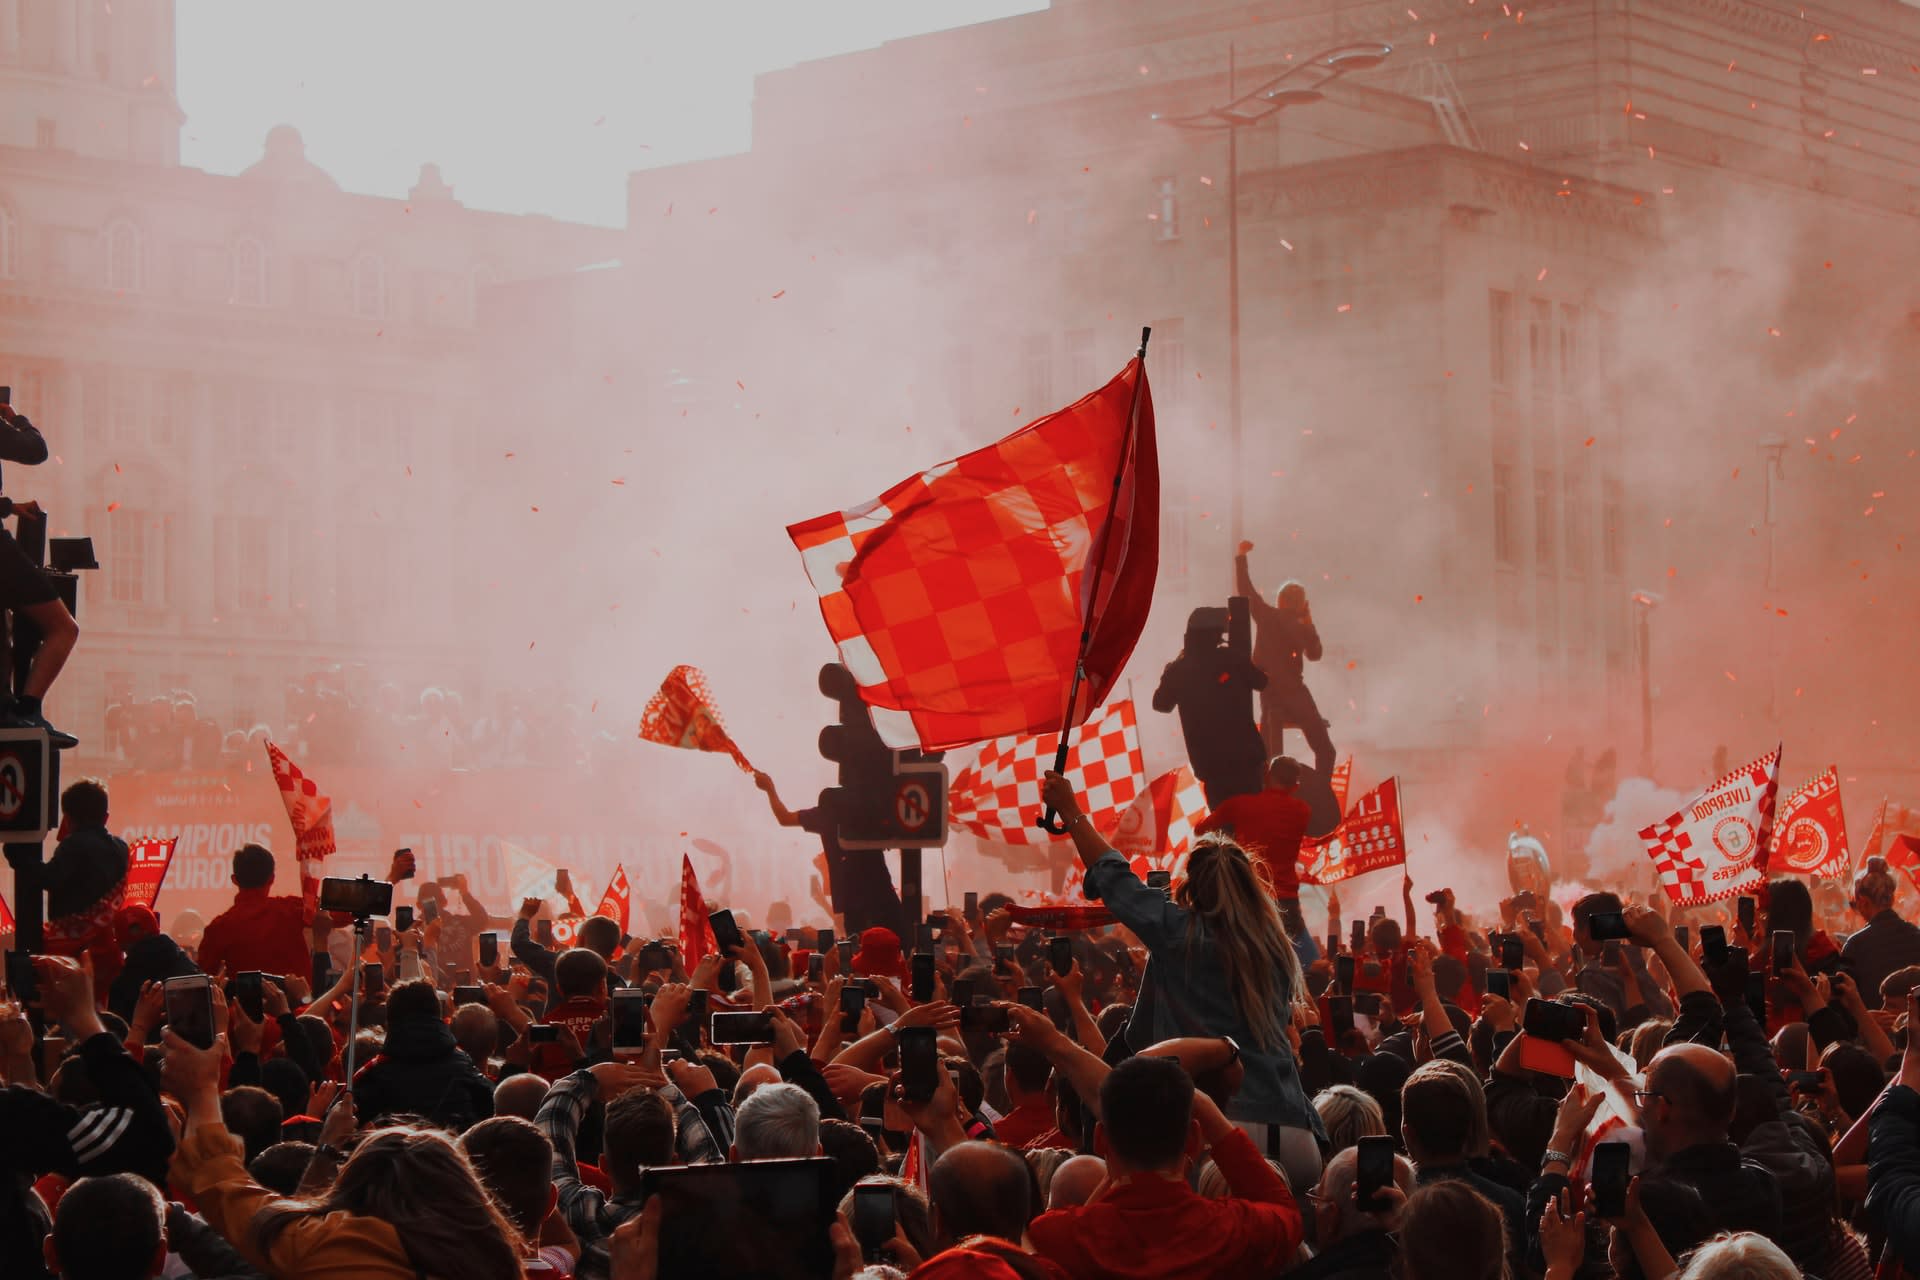 Fan Engagement in Football: What All Aspiring Football Industry Leaders Should Know